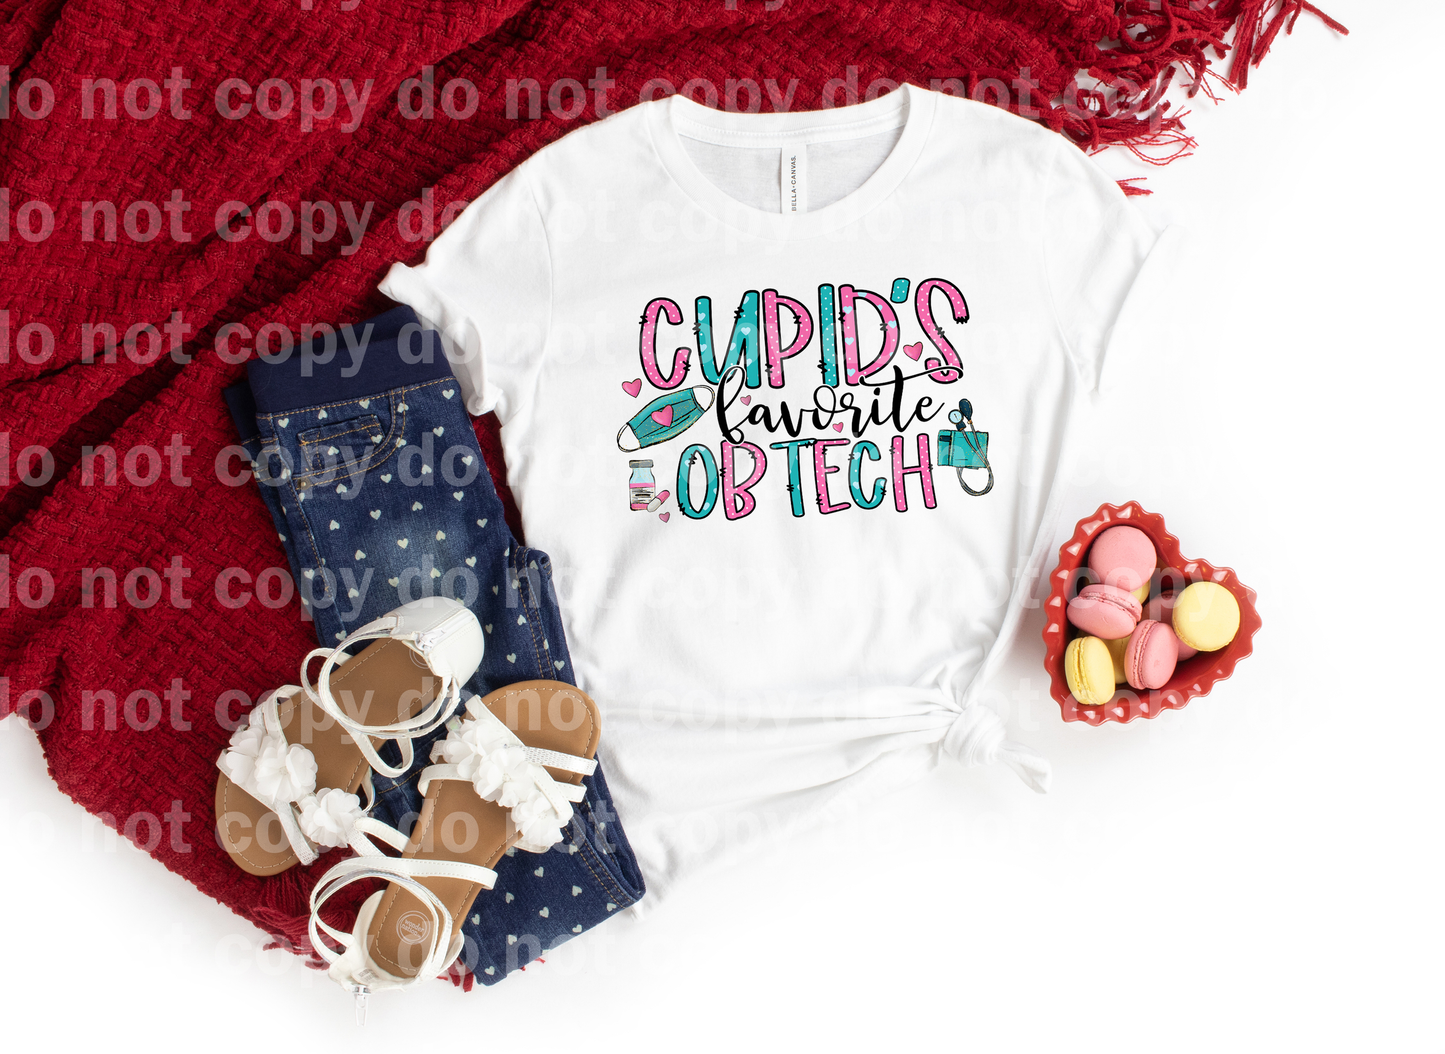 Cupid's Favorite OB Teach Blue Pink/Gold Red Dream Print or Sublimation Print